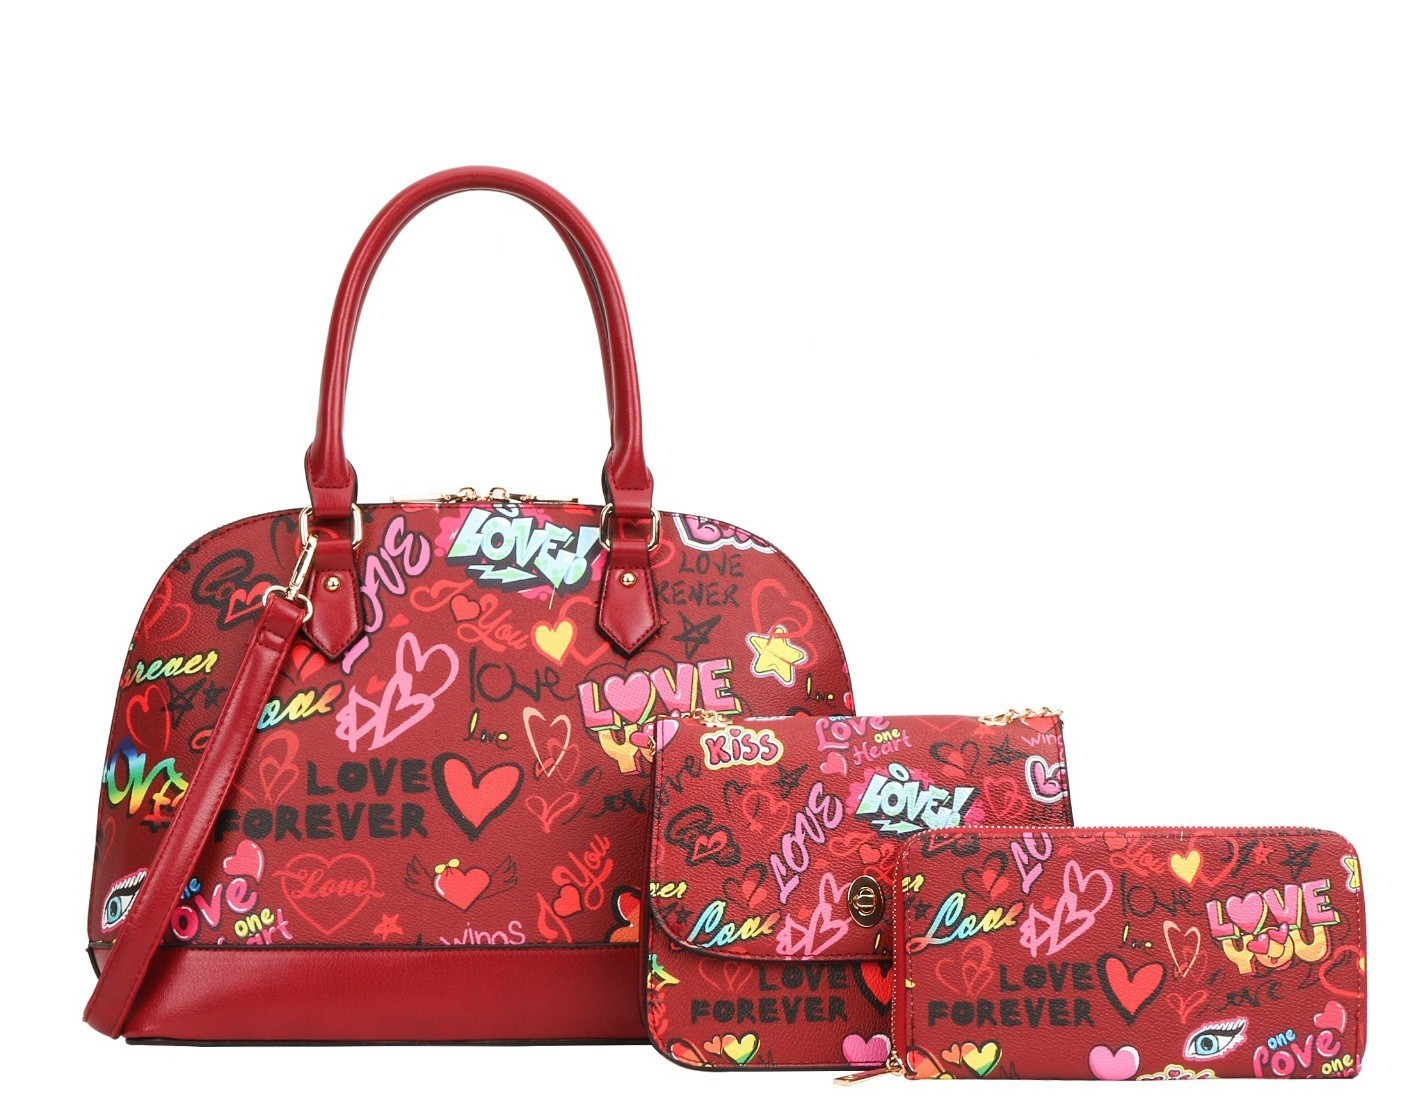 Louis Vuitton Jelly bag. Available on - Hearts and Fashion